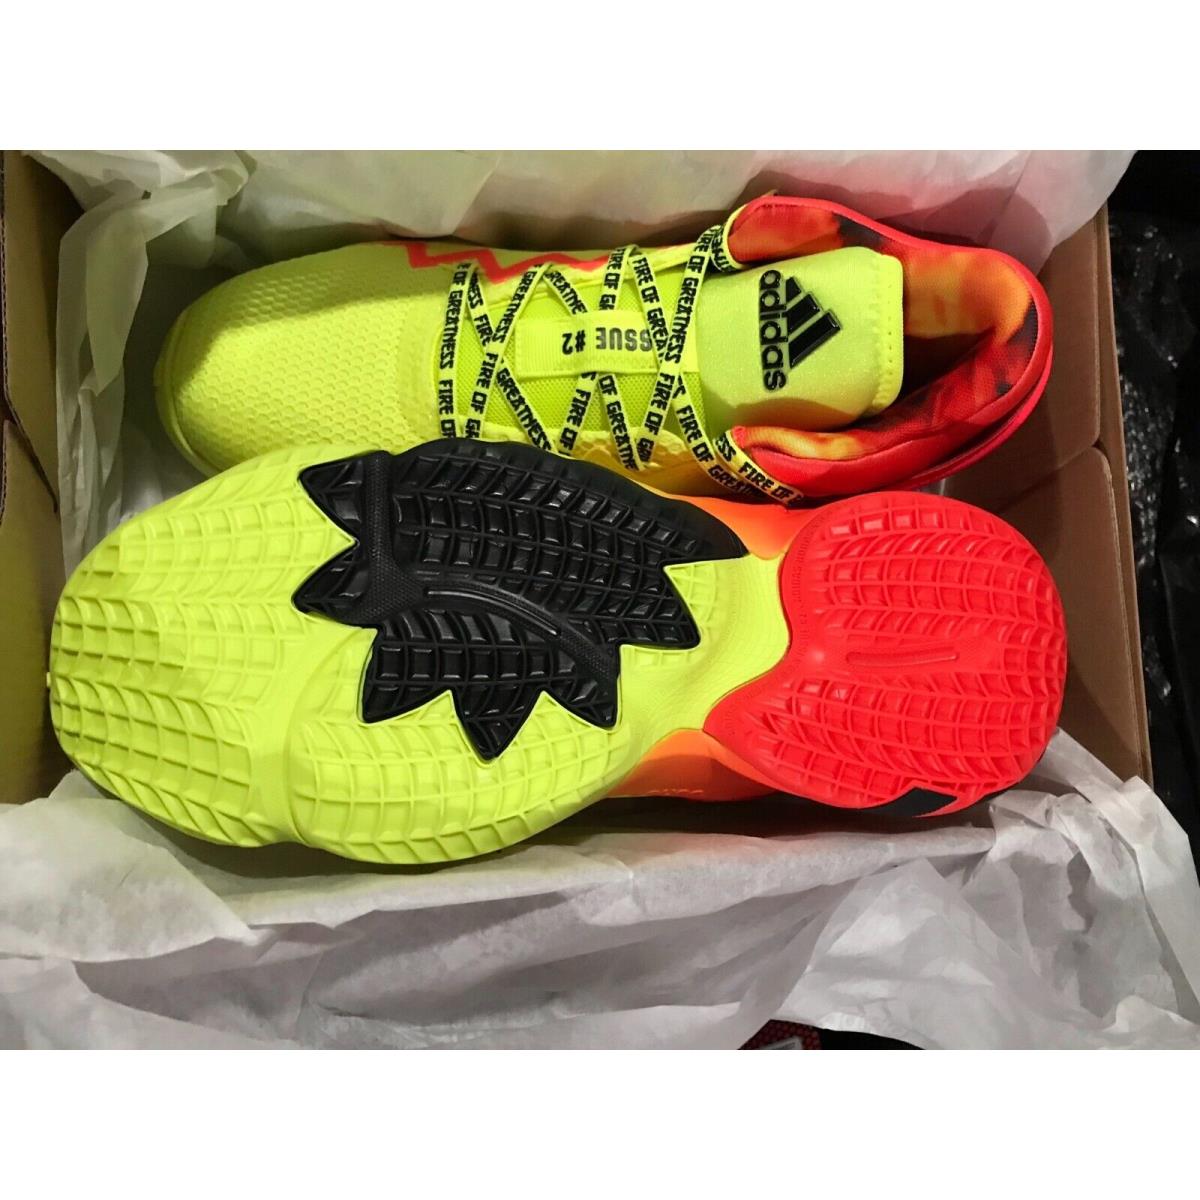 Adidas shoes  - Solar Yellow/Solar Red/Core Black 13